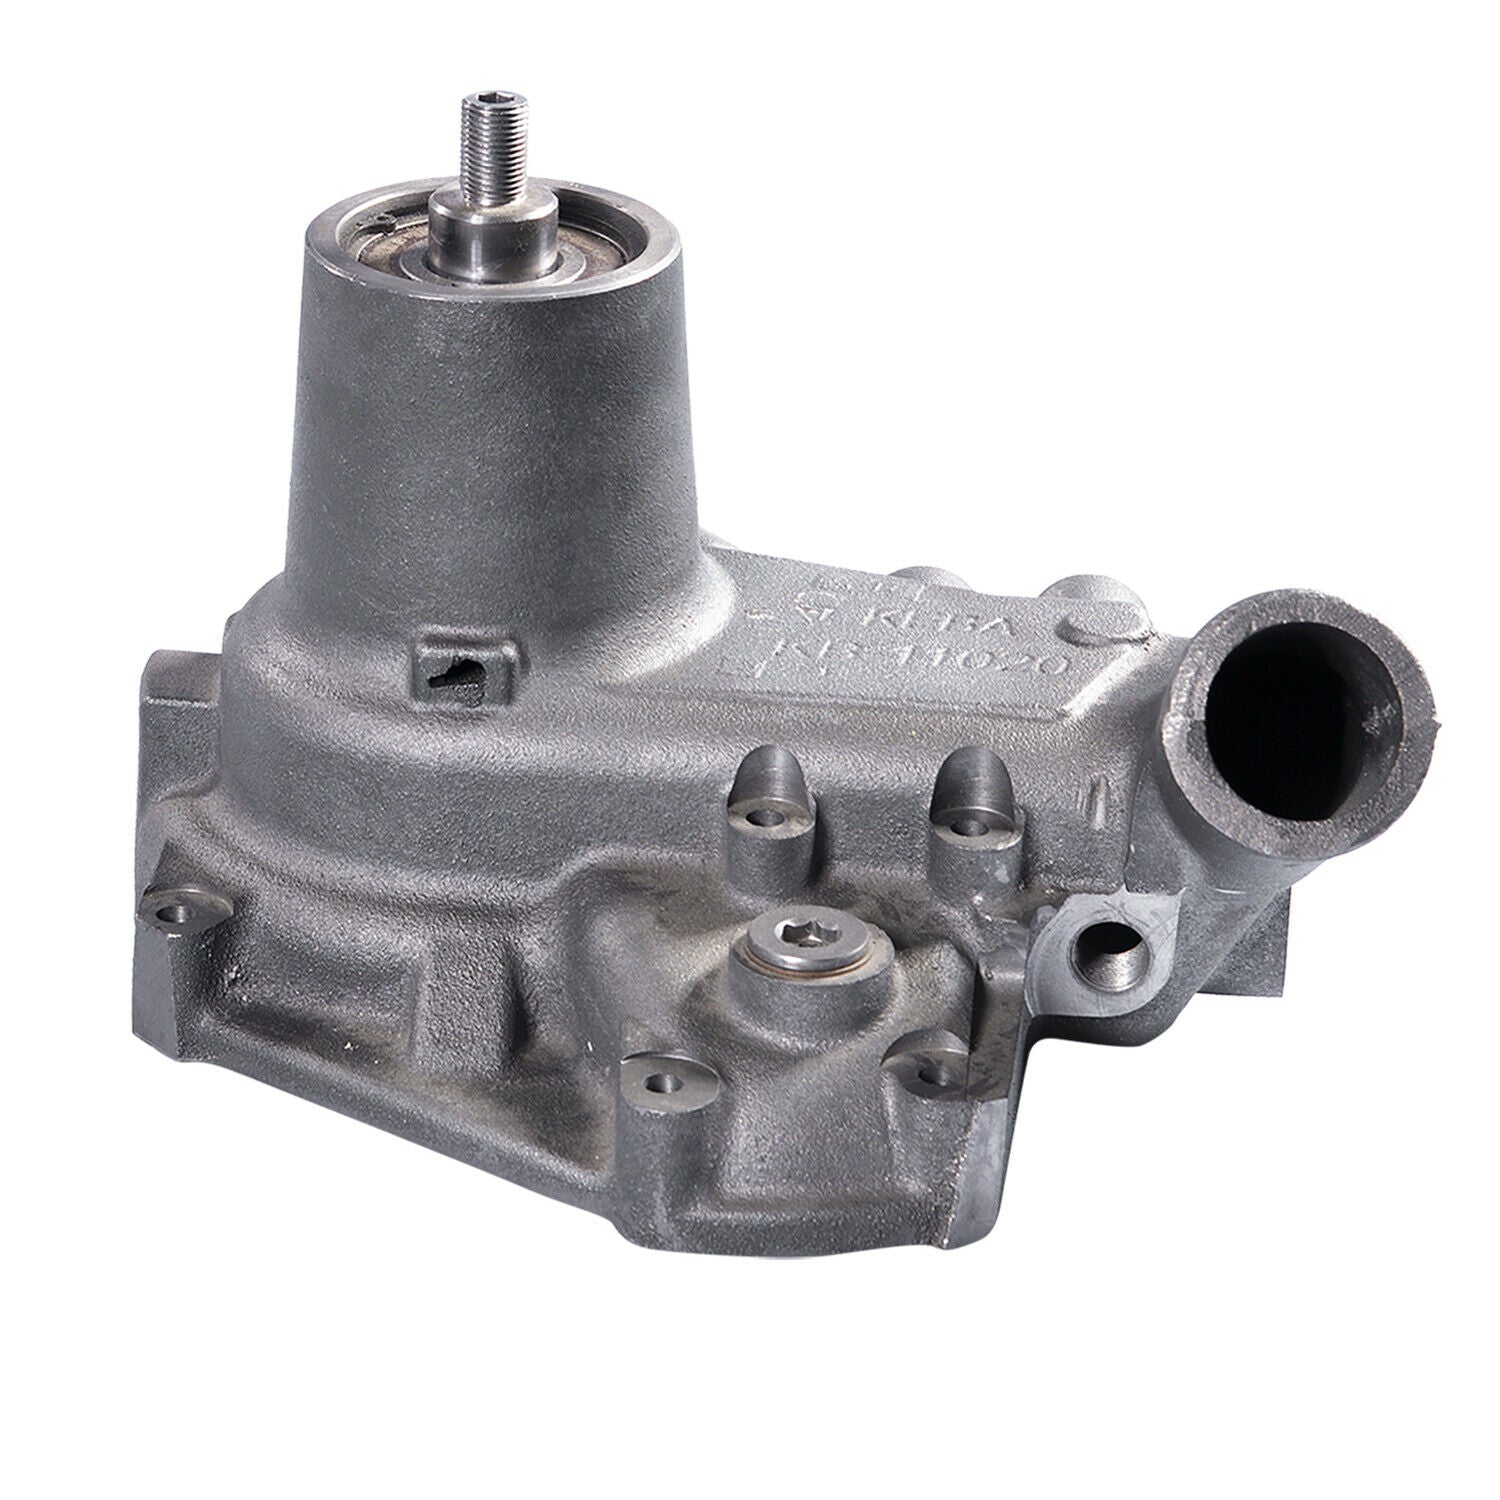 Water Pump Replacement for MF CASE 5465 1195 140 V837079839 836867628